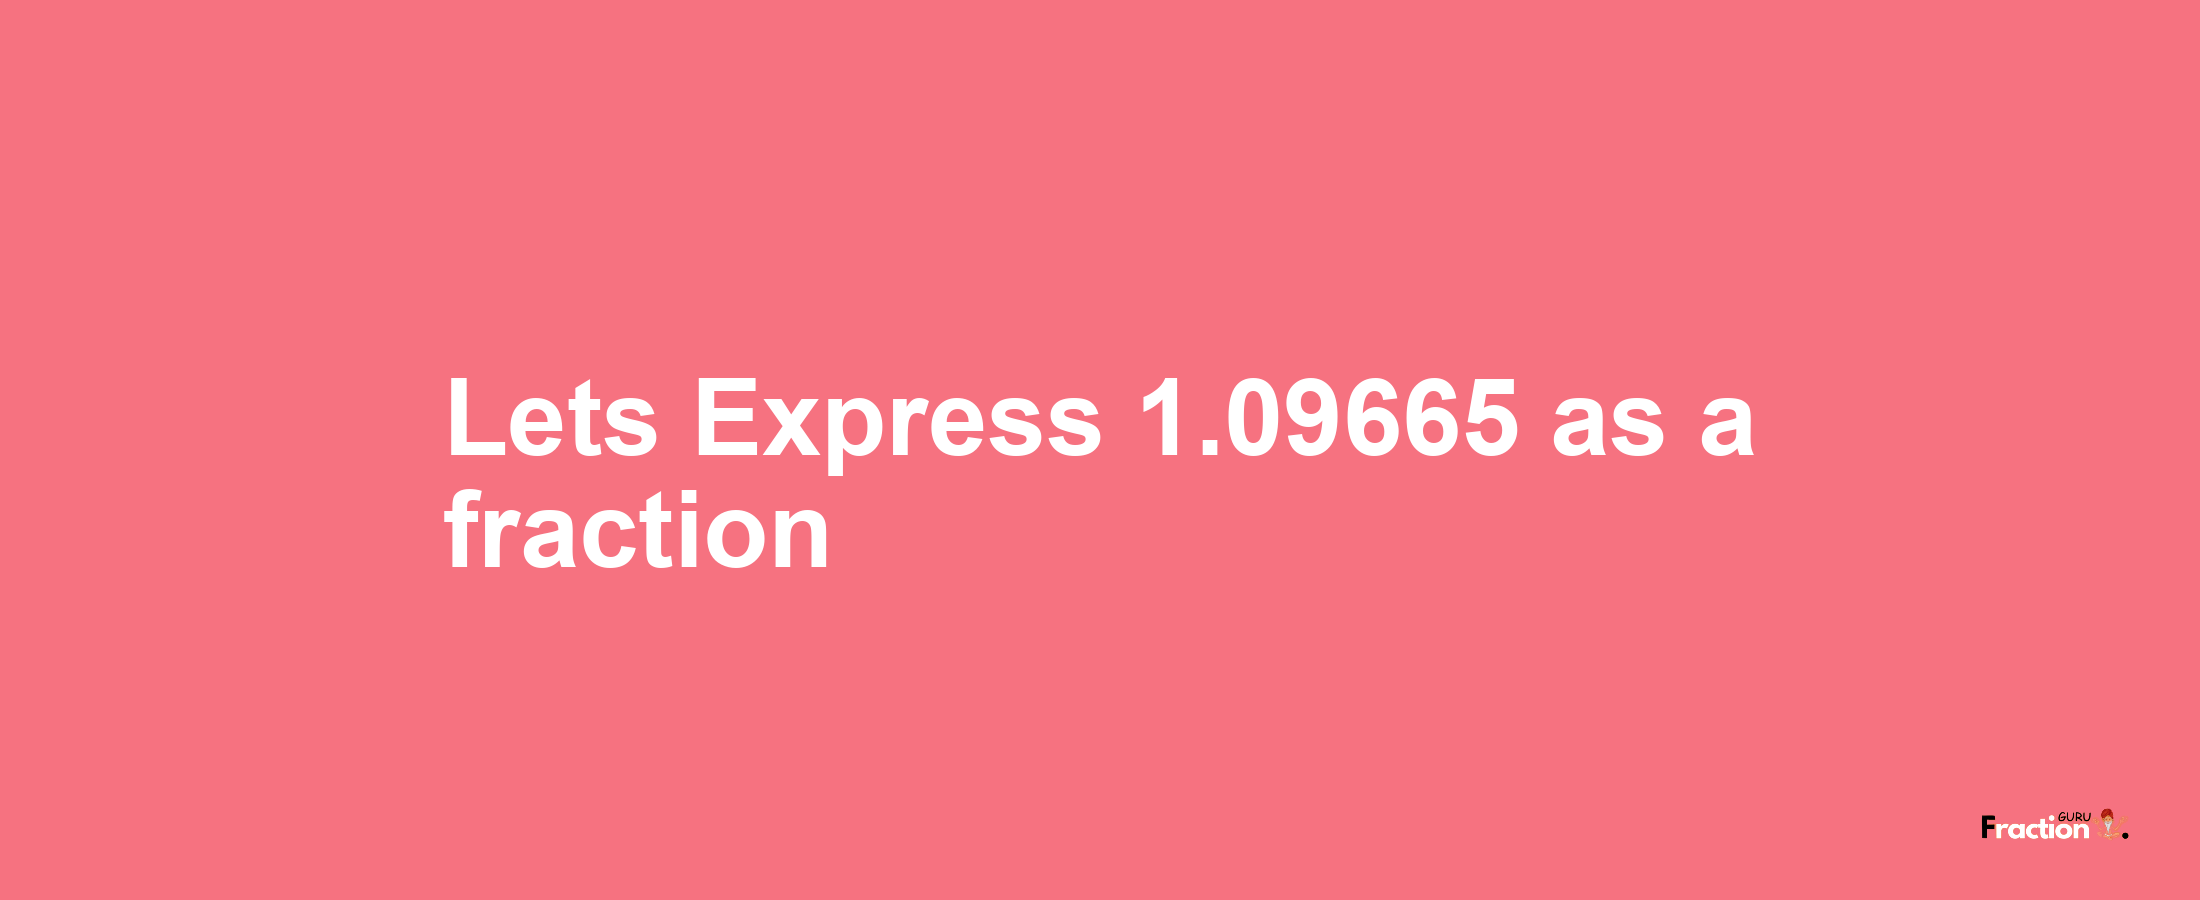 Lets Express 1.09665 as afraction